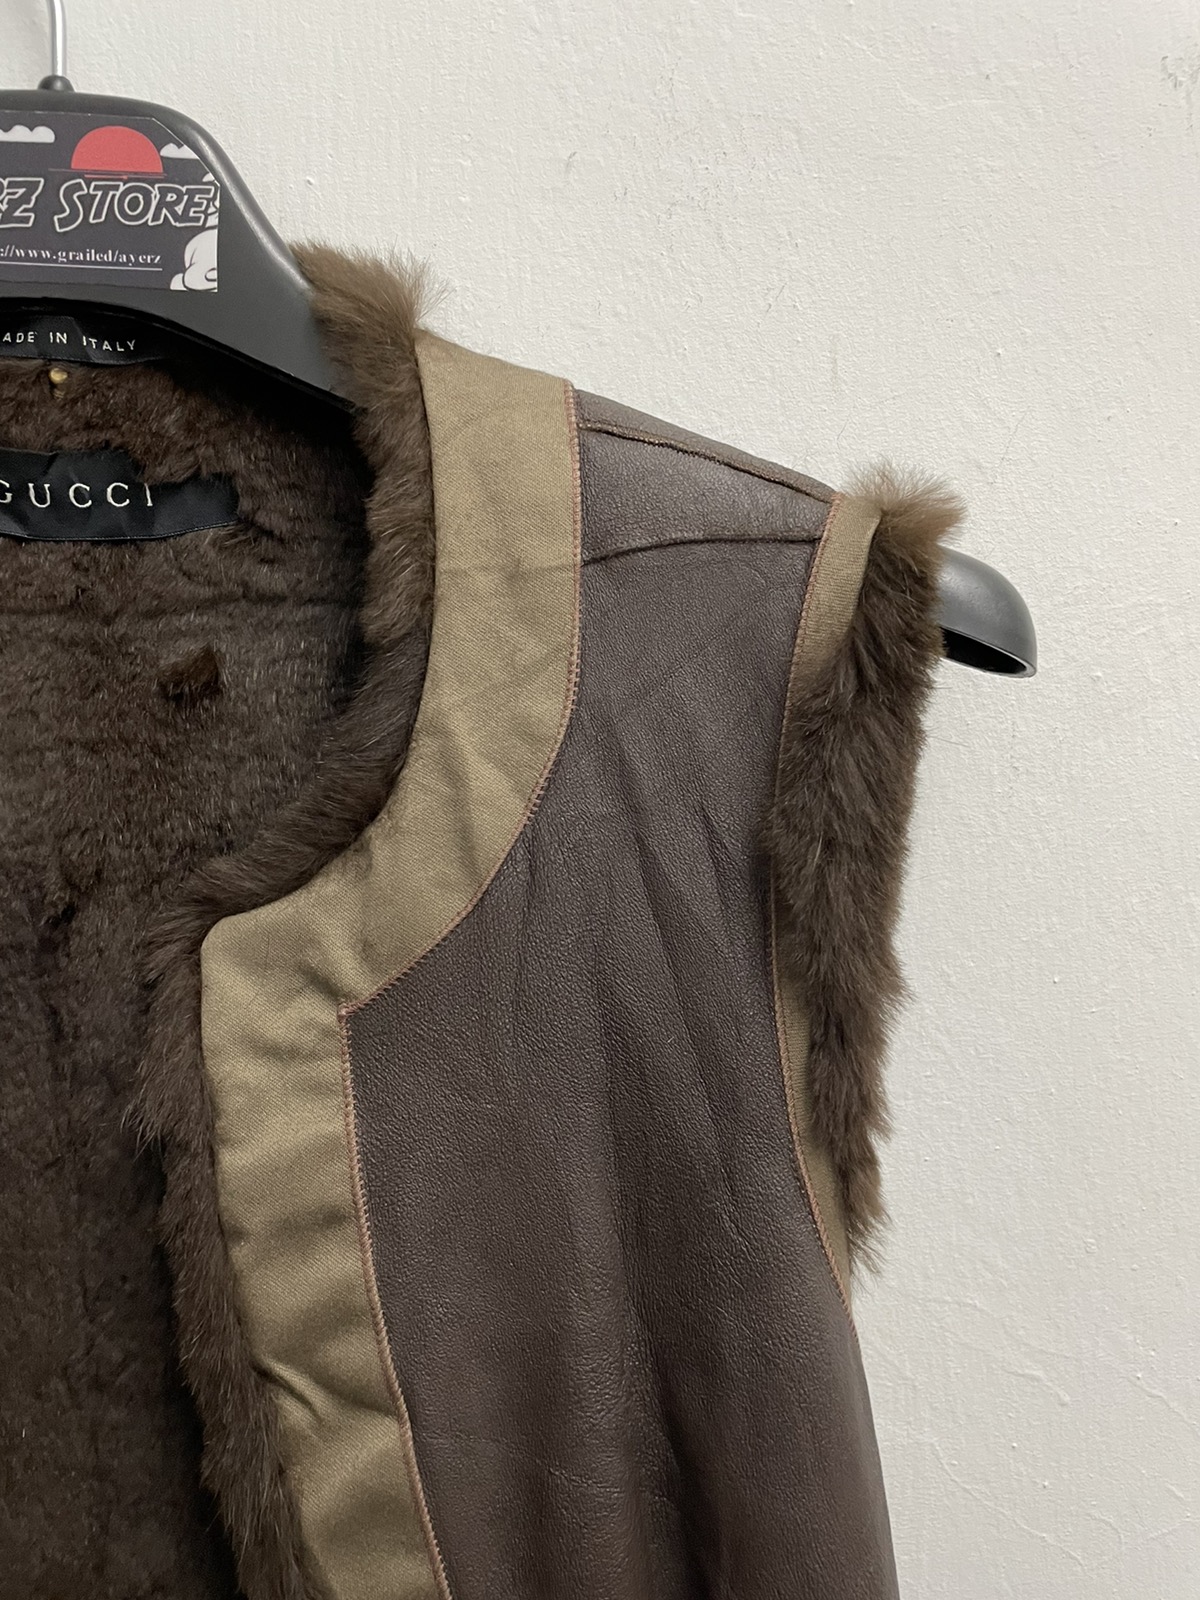 Gucci The Natural Lapin Fur Leather Vest Jackets Size 38 - 2